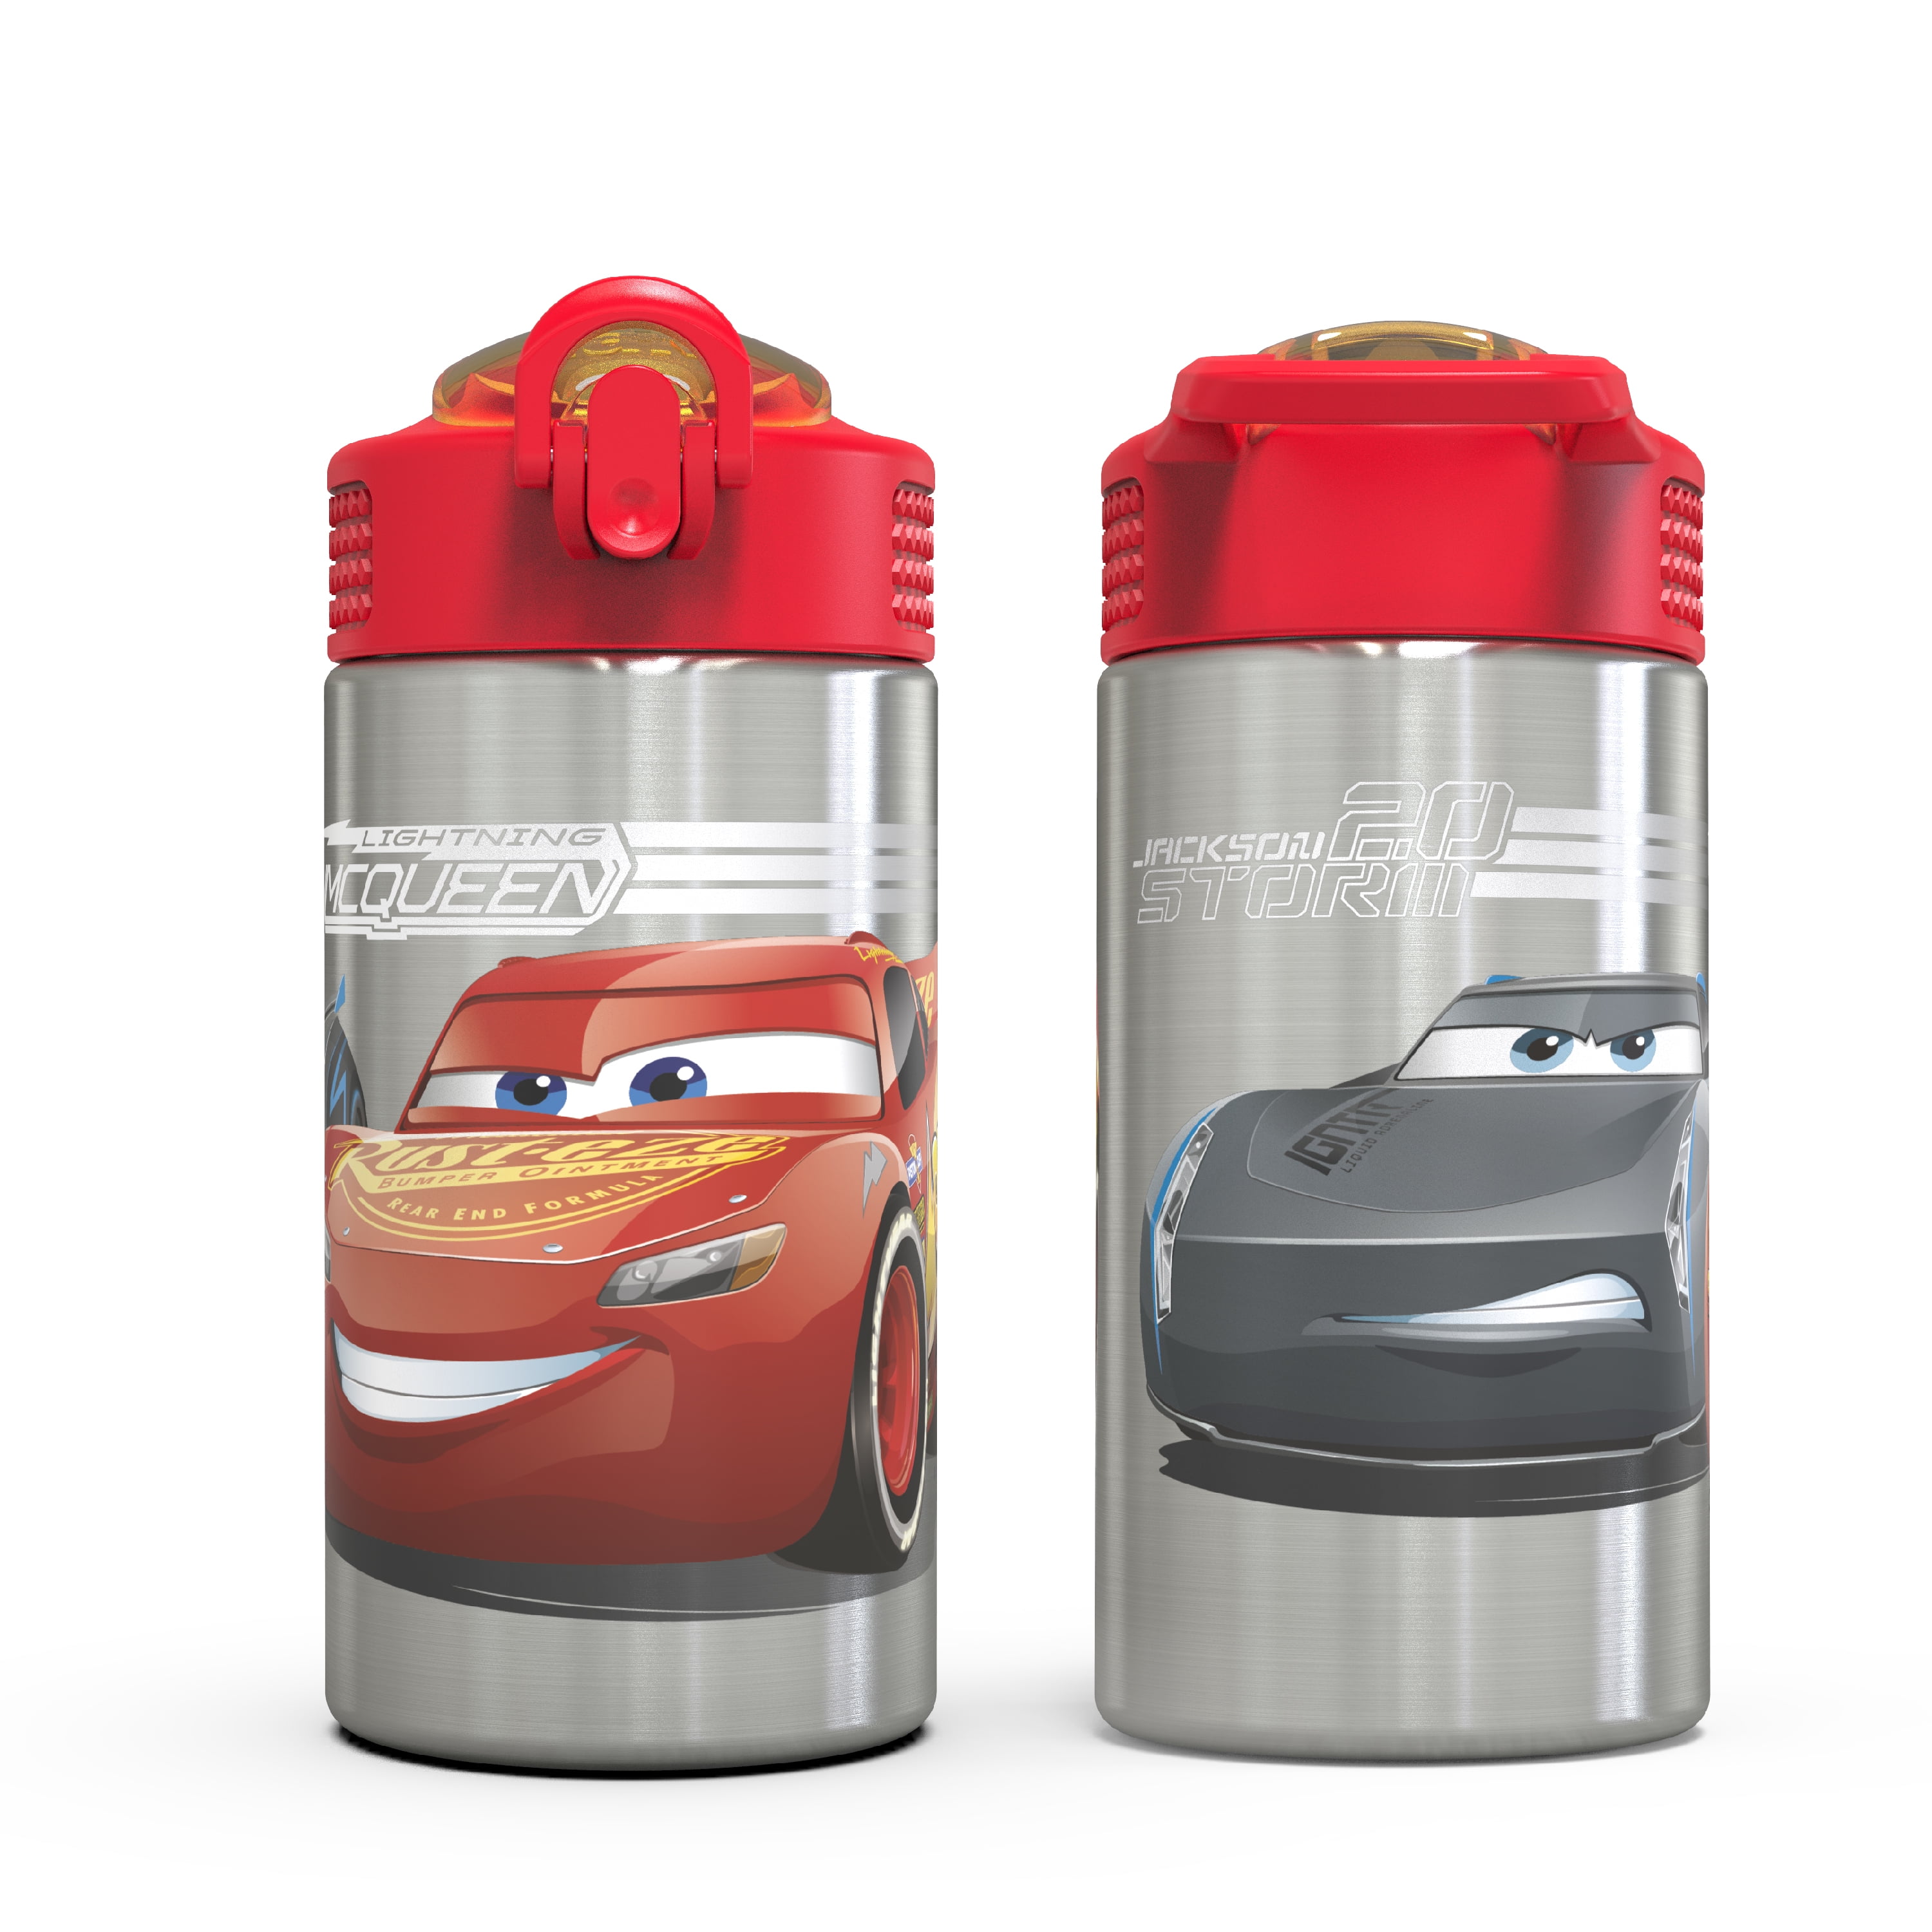 Disney Cars Basket With Water Bottle, Red